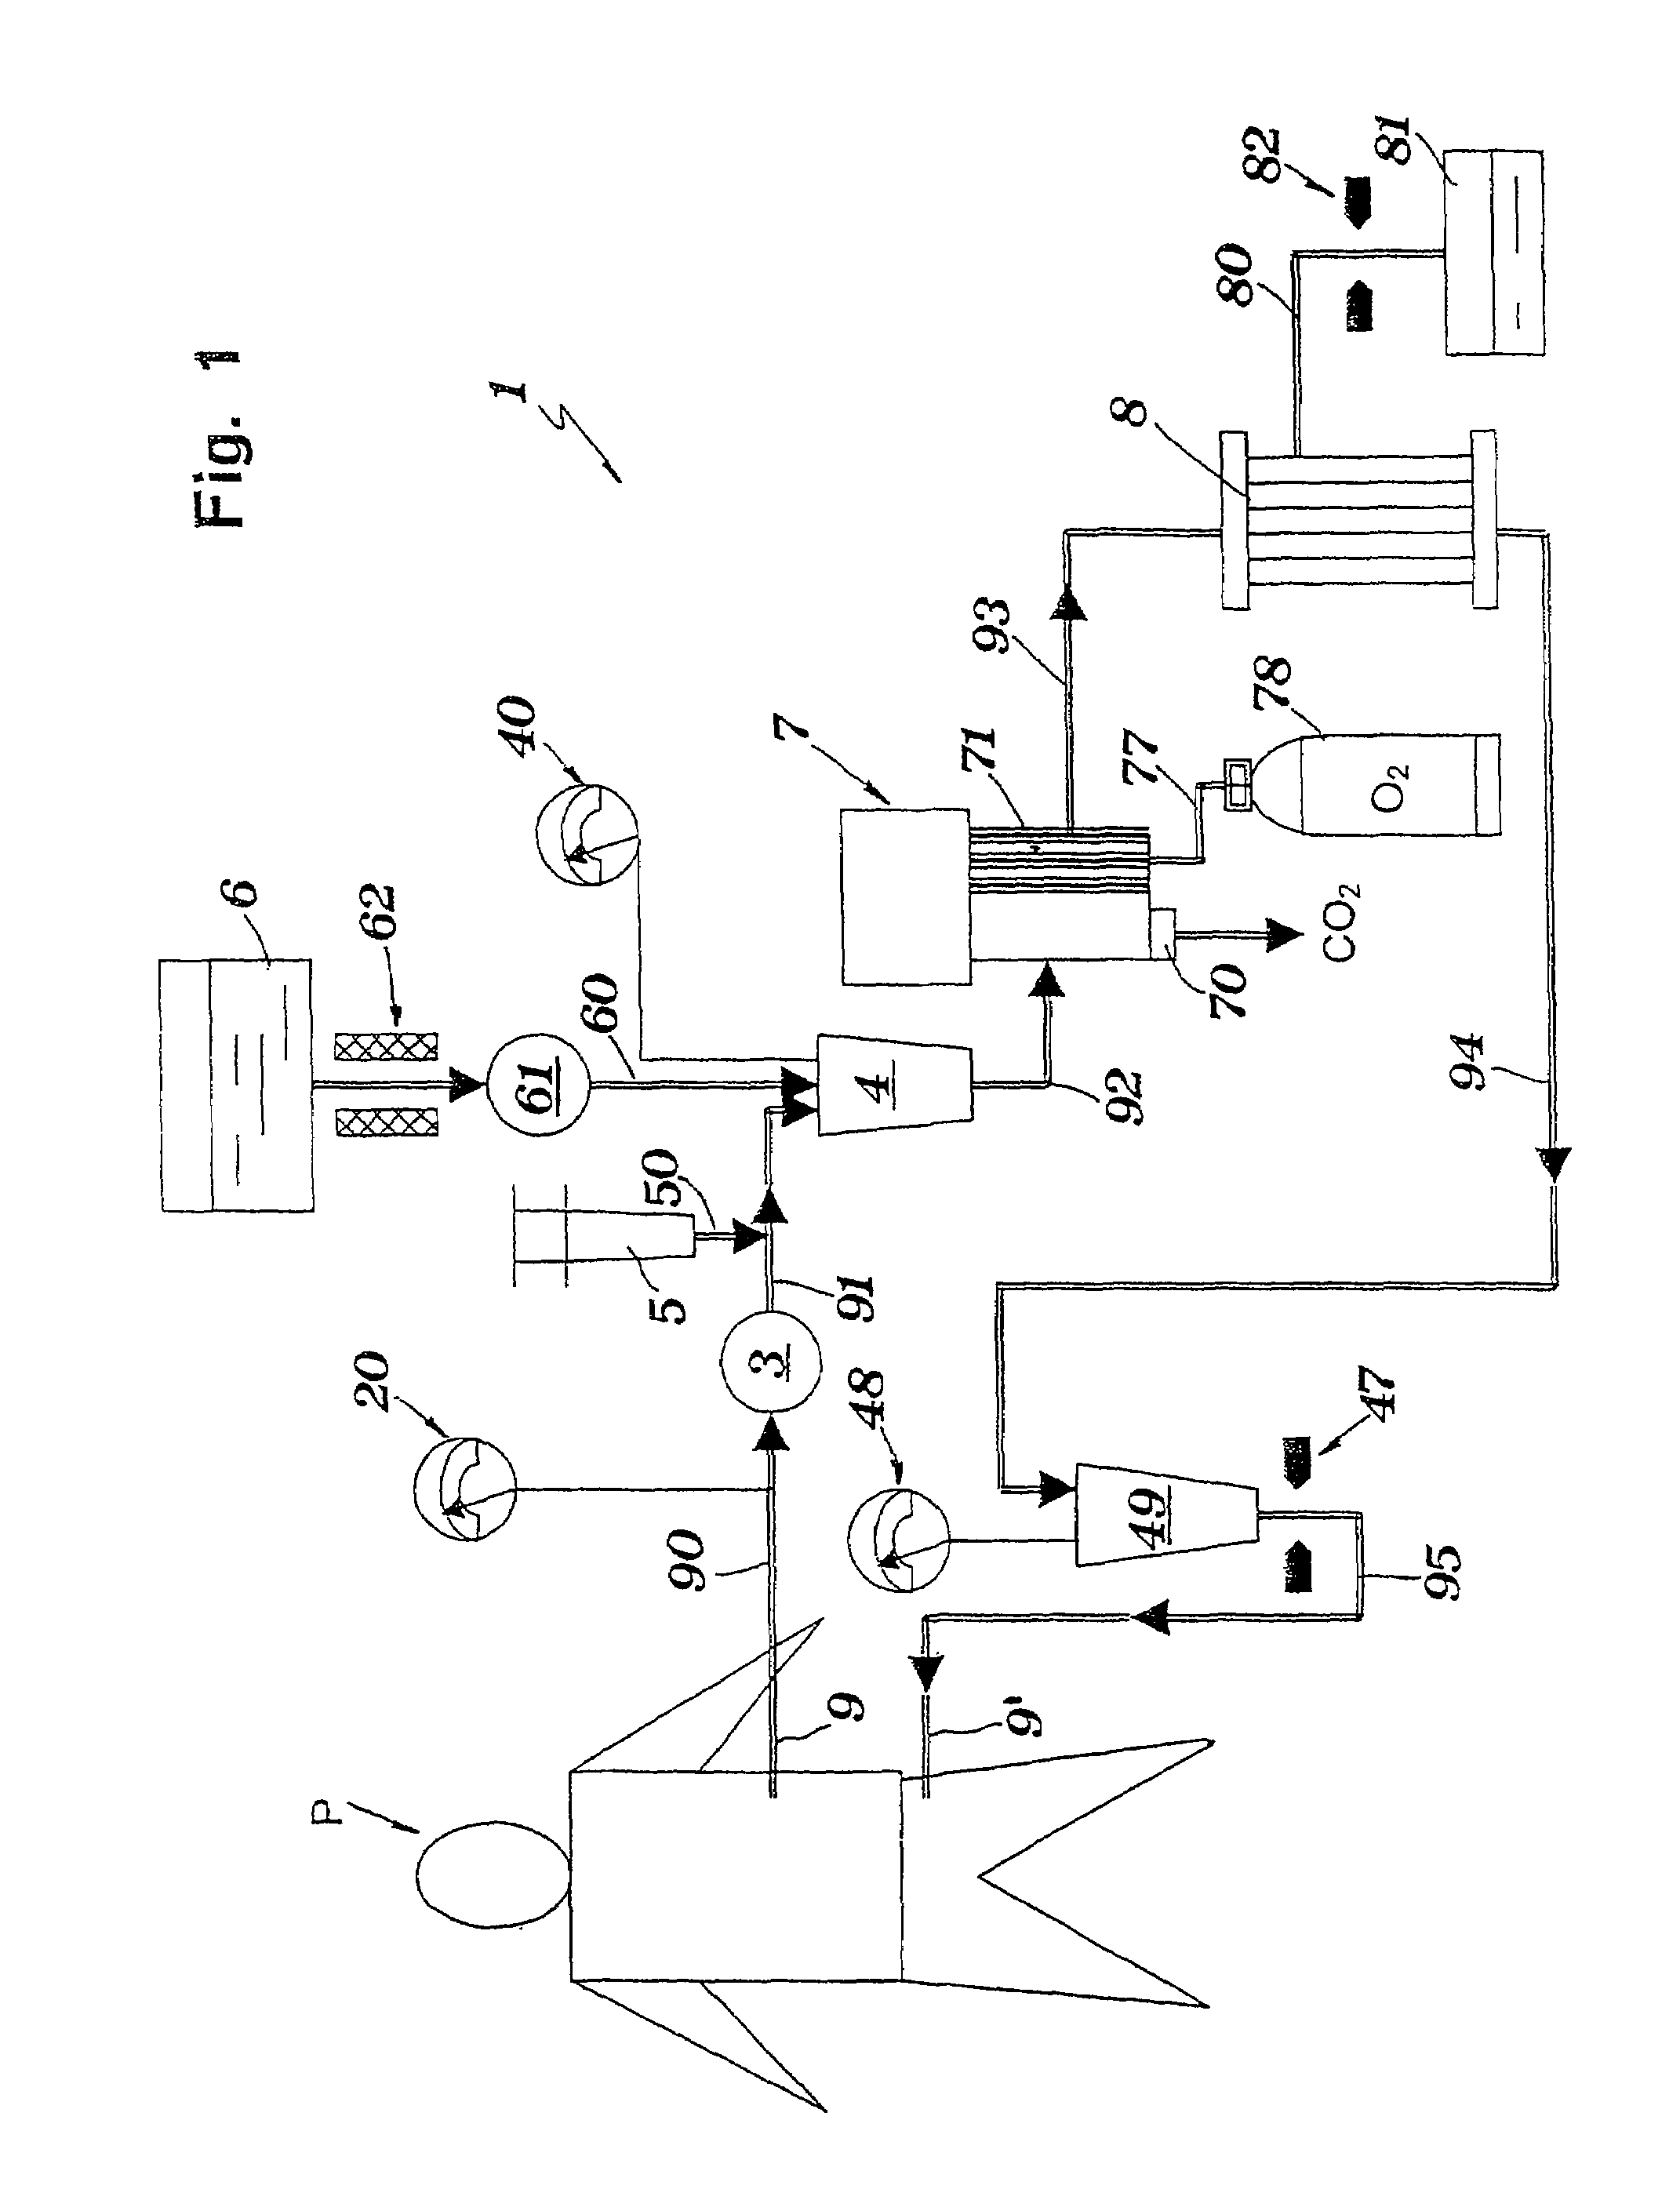 Apparatus and method for the treatment of blood